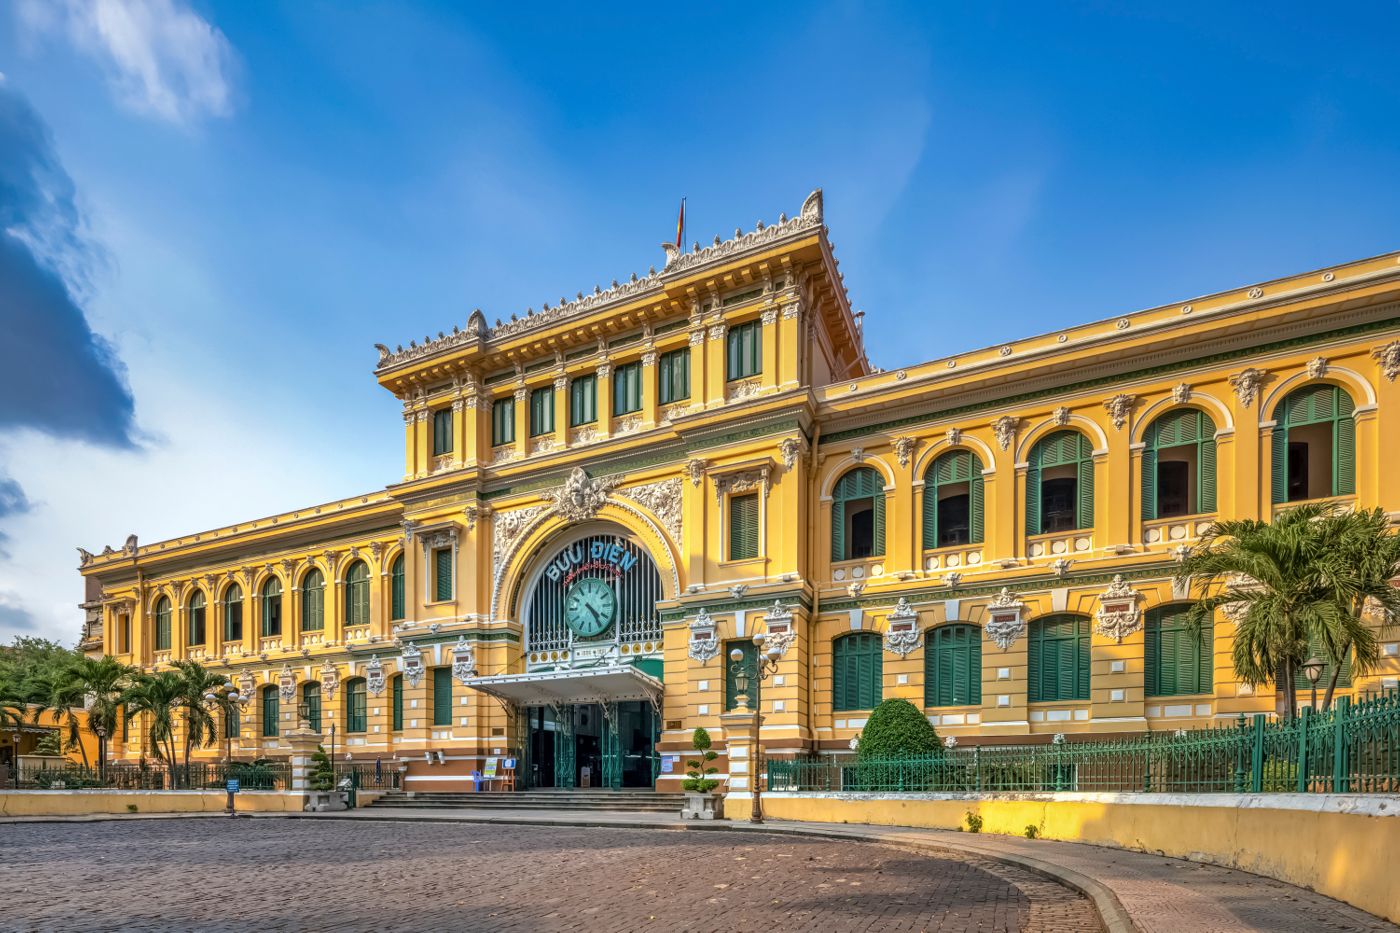 HO CHI MINH TRAVEL GUIDE - Saigon Central Post Office